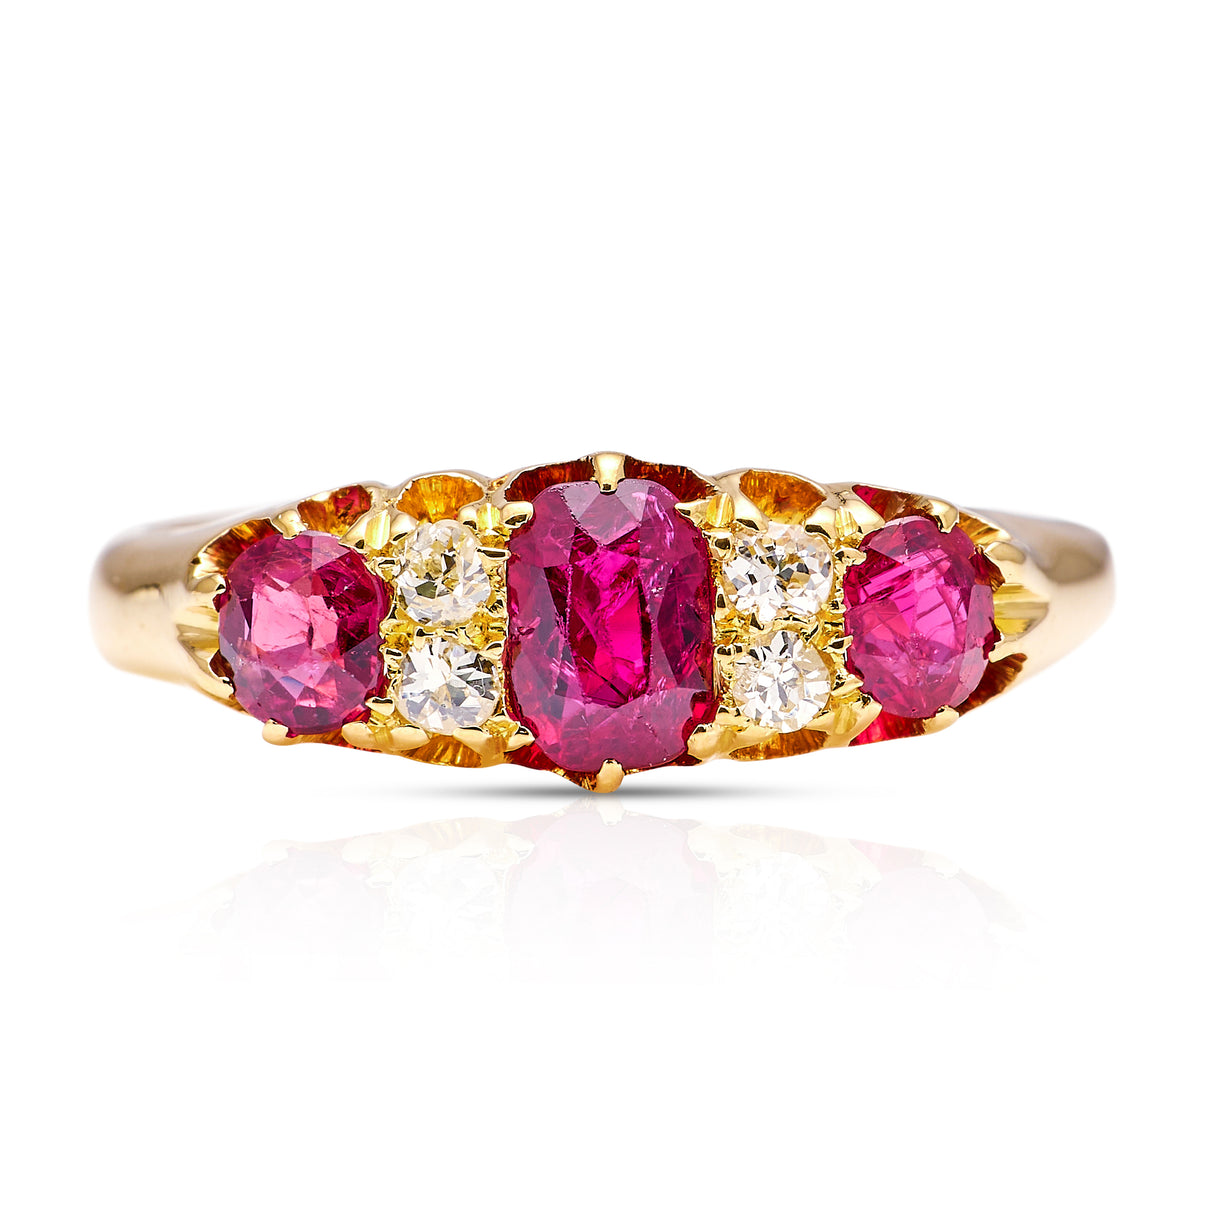 Antique, Edwardian Three-Stone Ruby and Diamond Ring, 18ct Yellow Gold